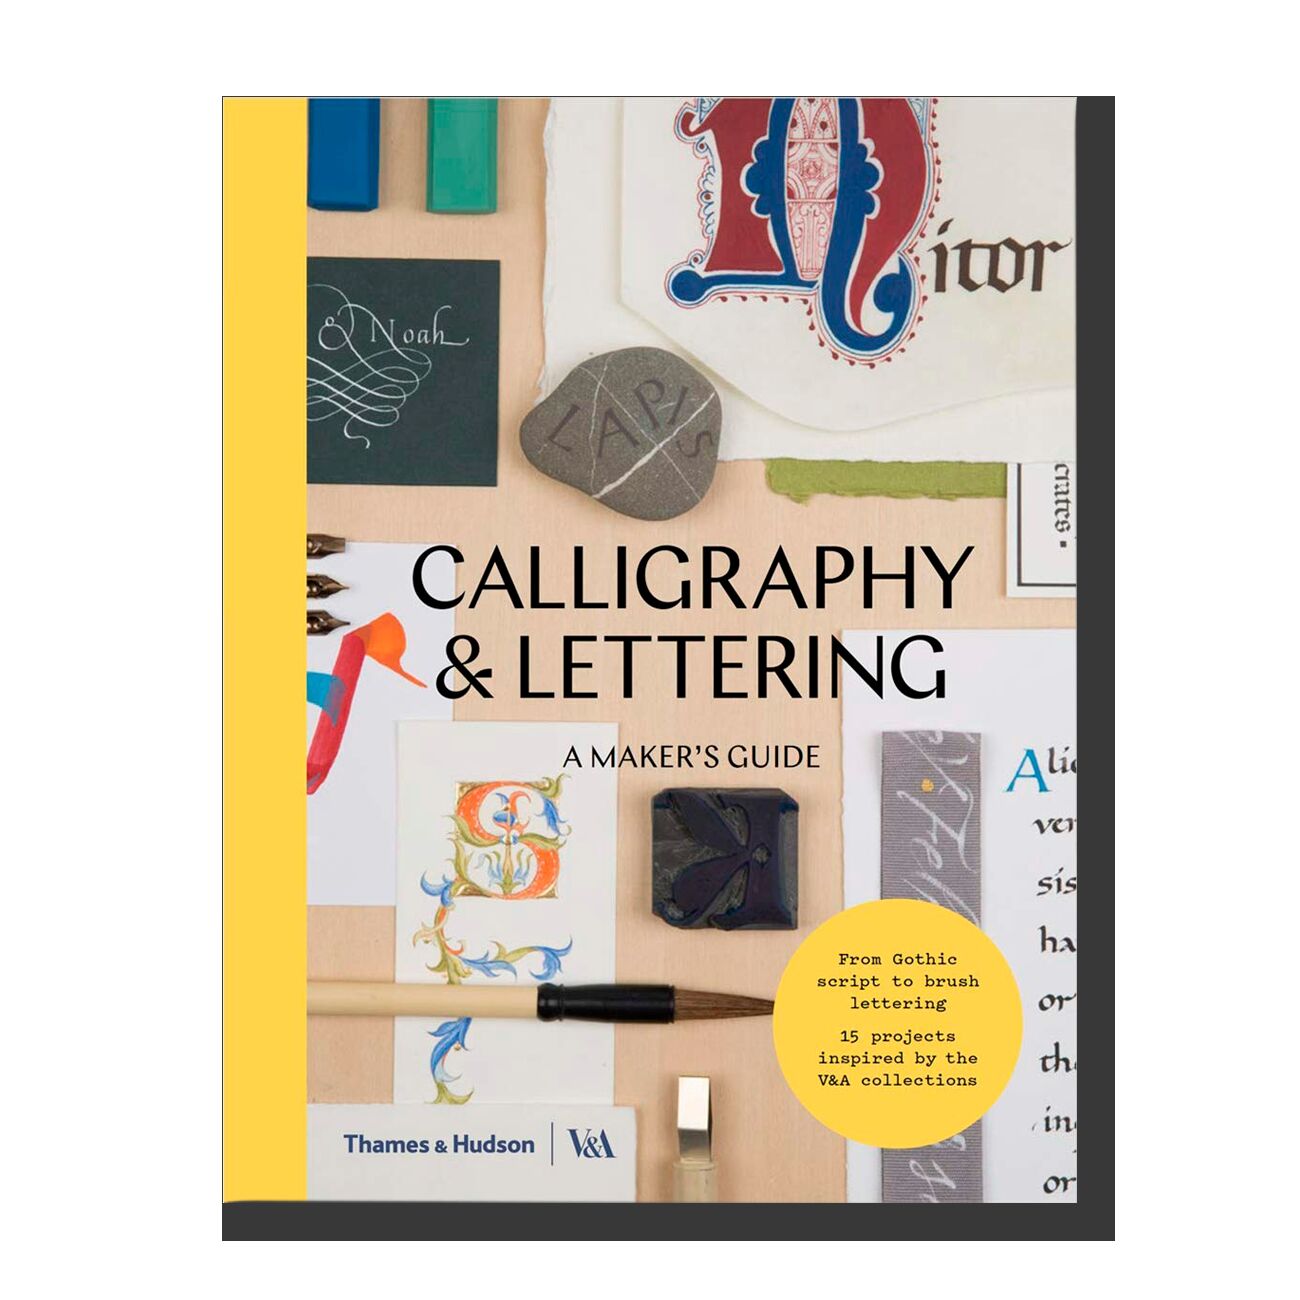 Calligraphy & Lettering: A Maker's Guide